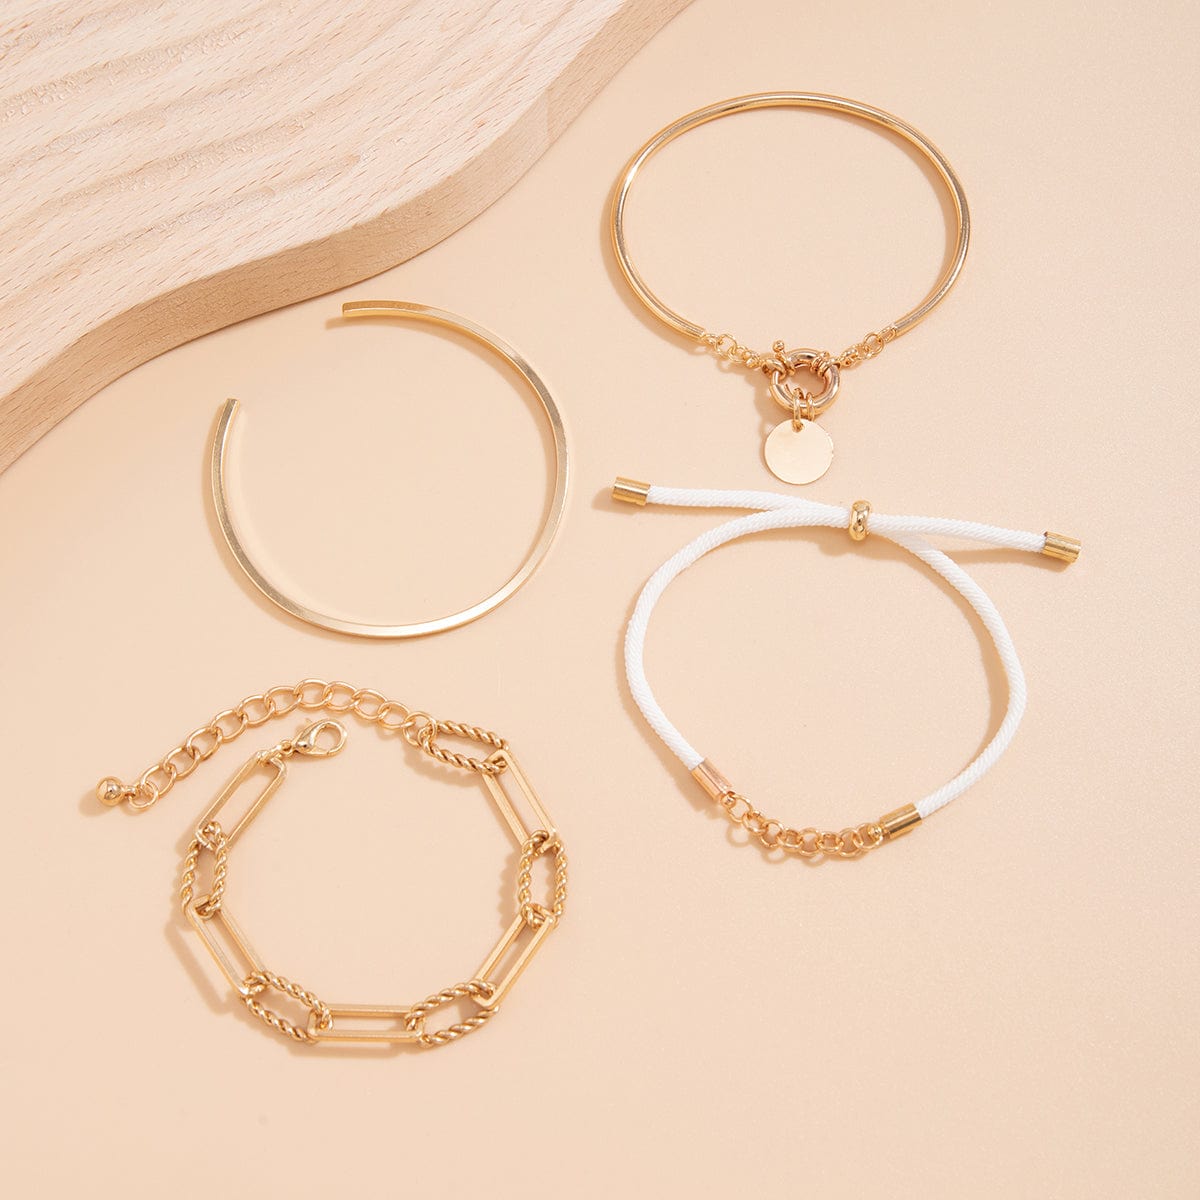 Chic Layered Knotted String Round Disk Cable Chain Bangle Bracelet Set - ArtGalleryZen